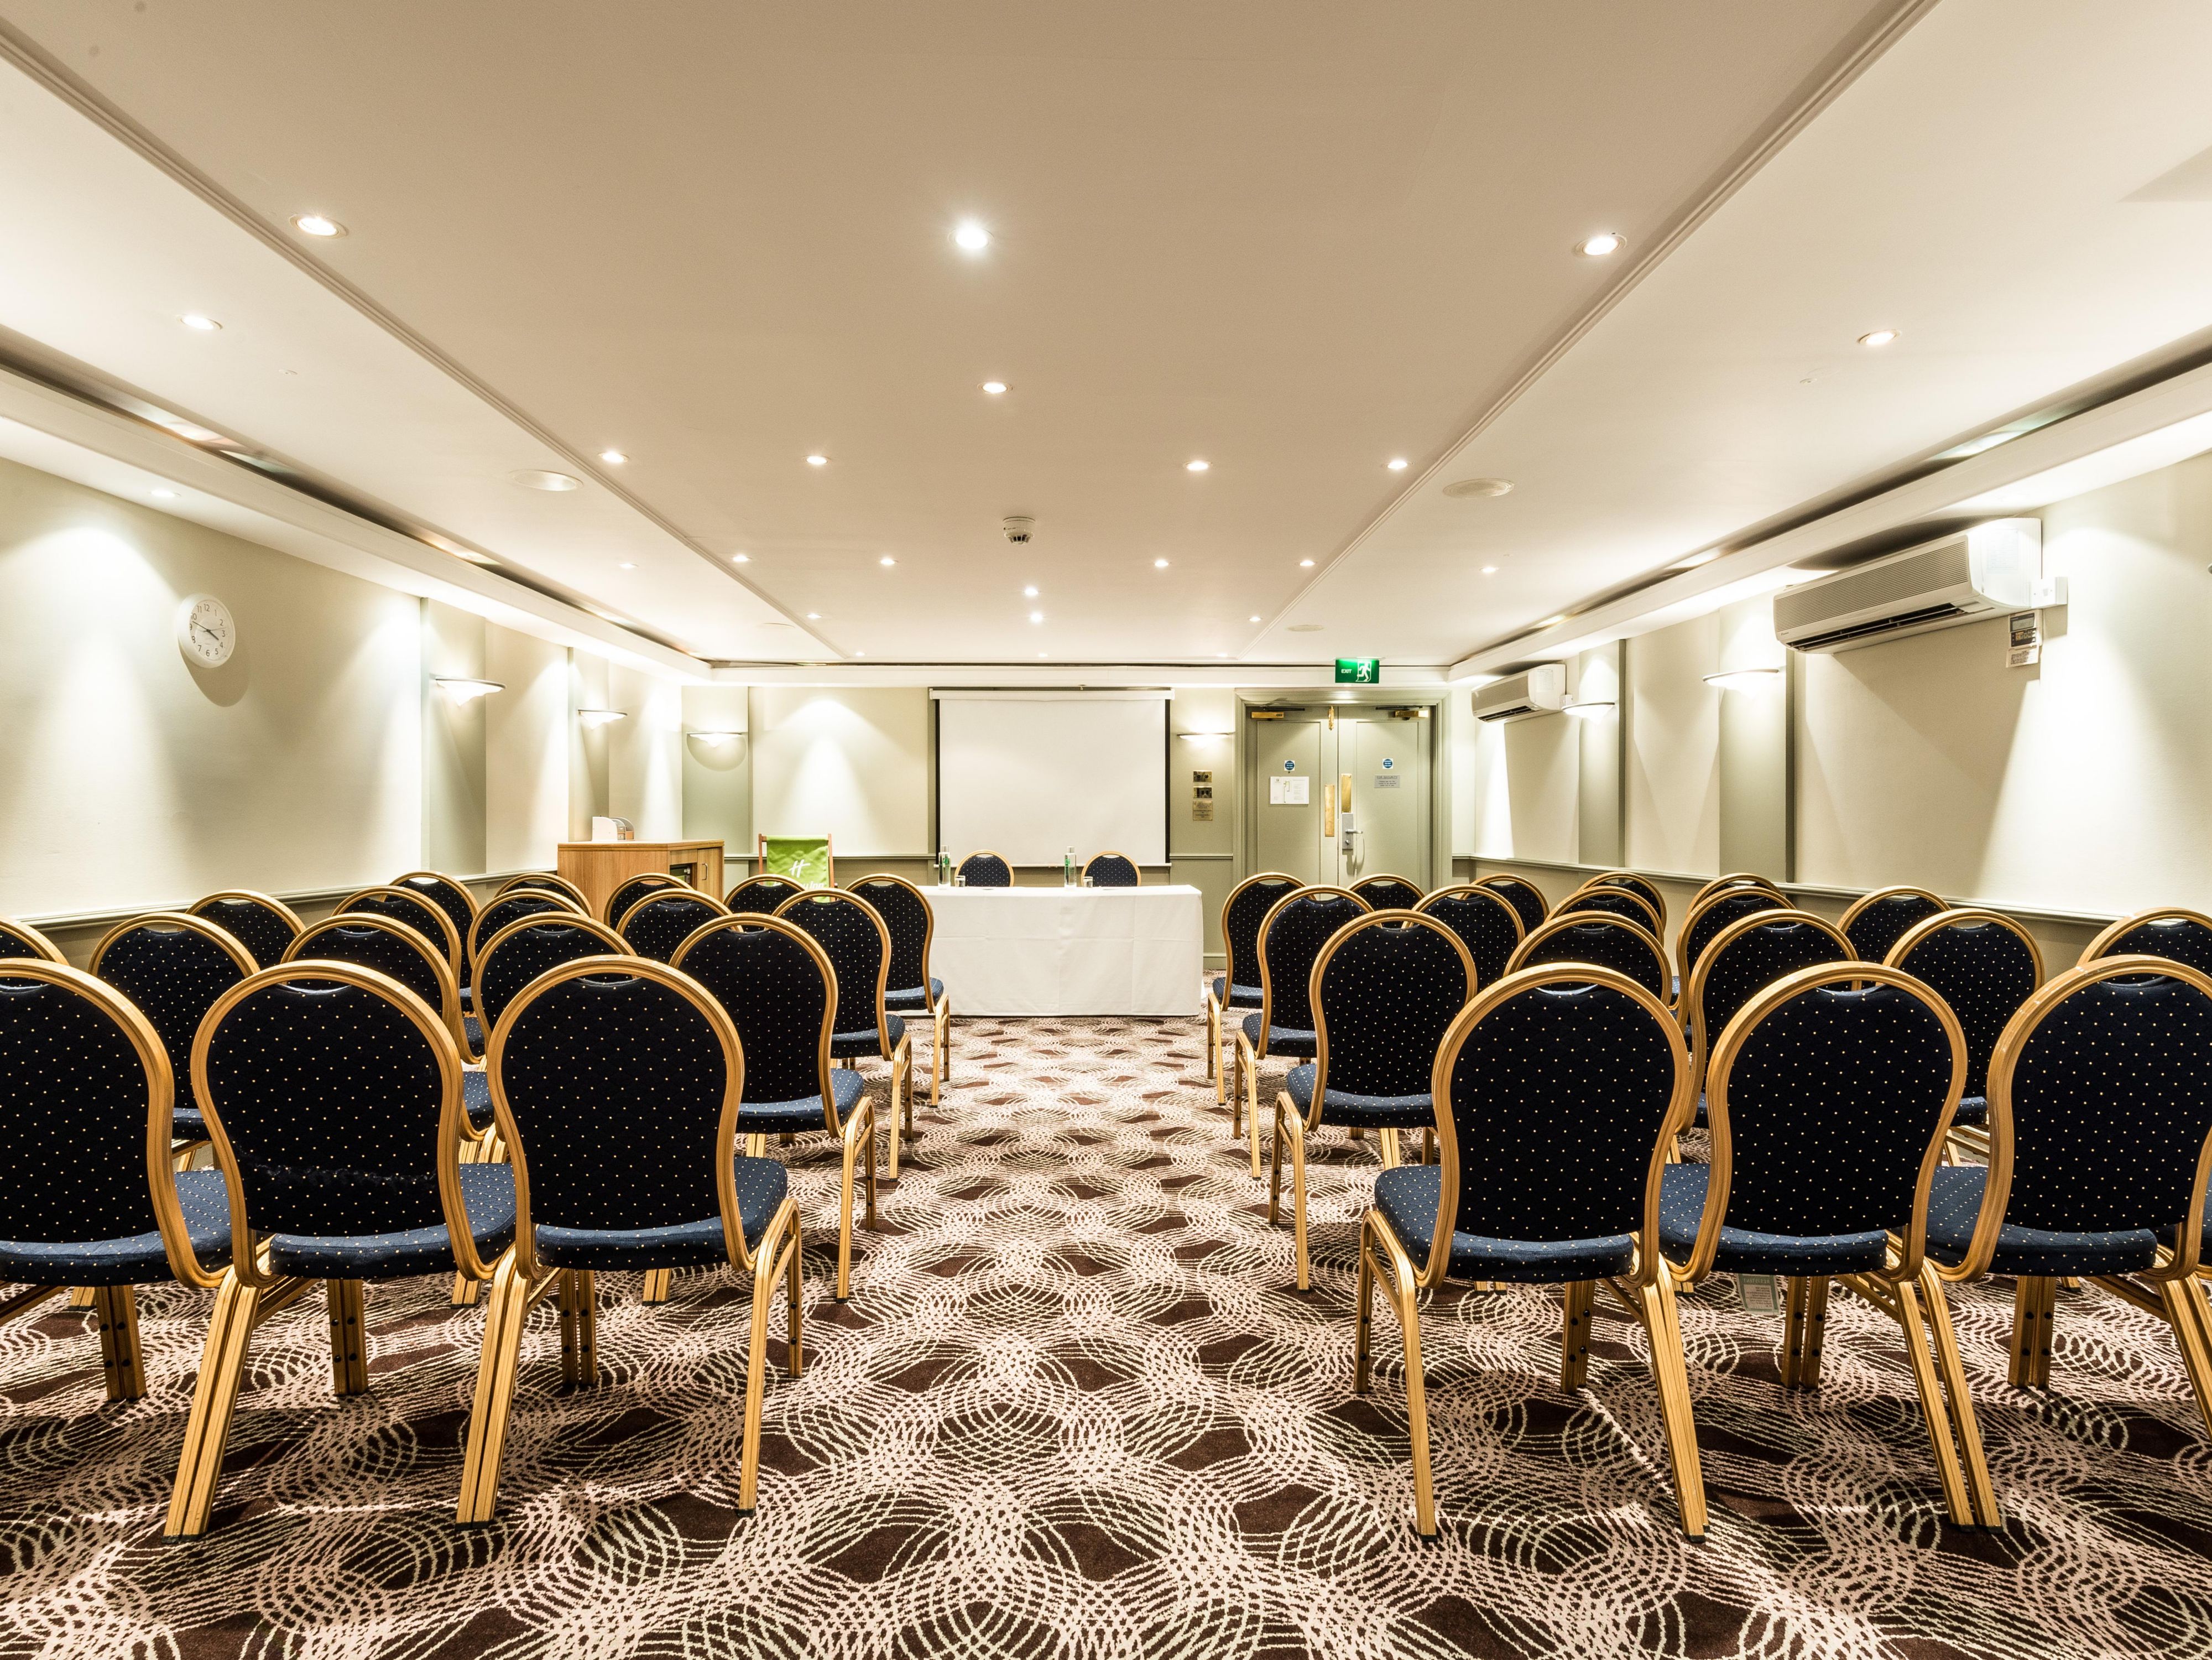 At Holiday Inn Brighton - Seafront, we specialise in creating memorable events that bring people together. Whether you're planning a family gathering, birthday party, or corporate dinner, our expert team takes care of every detail. 